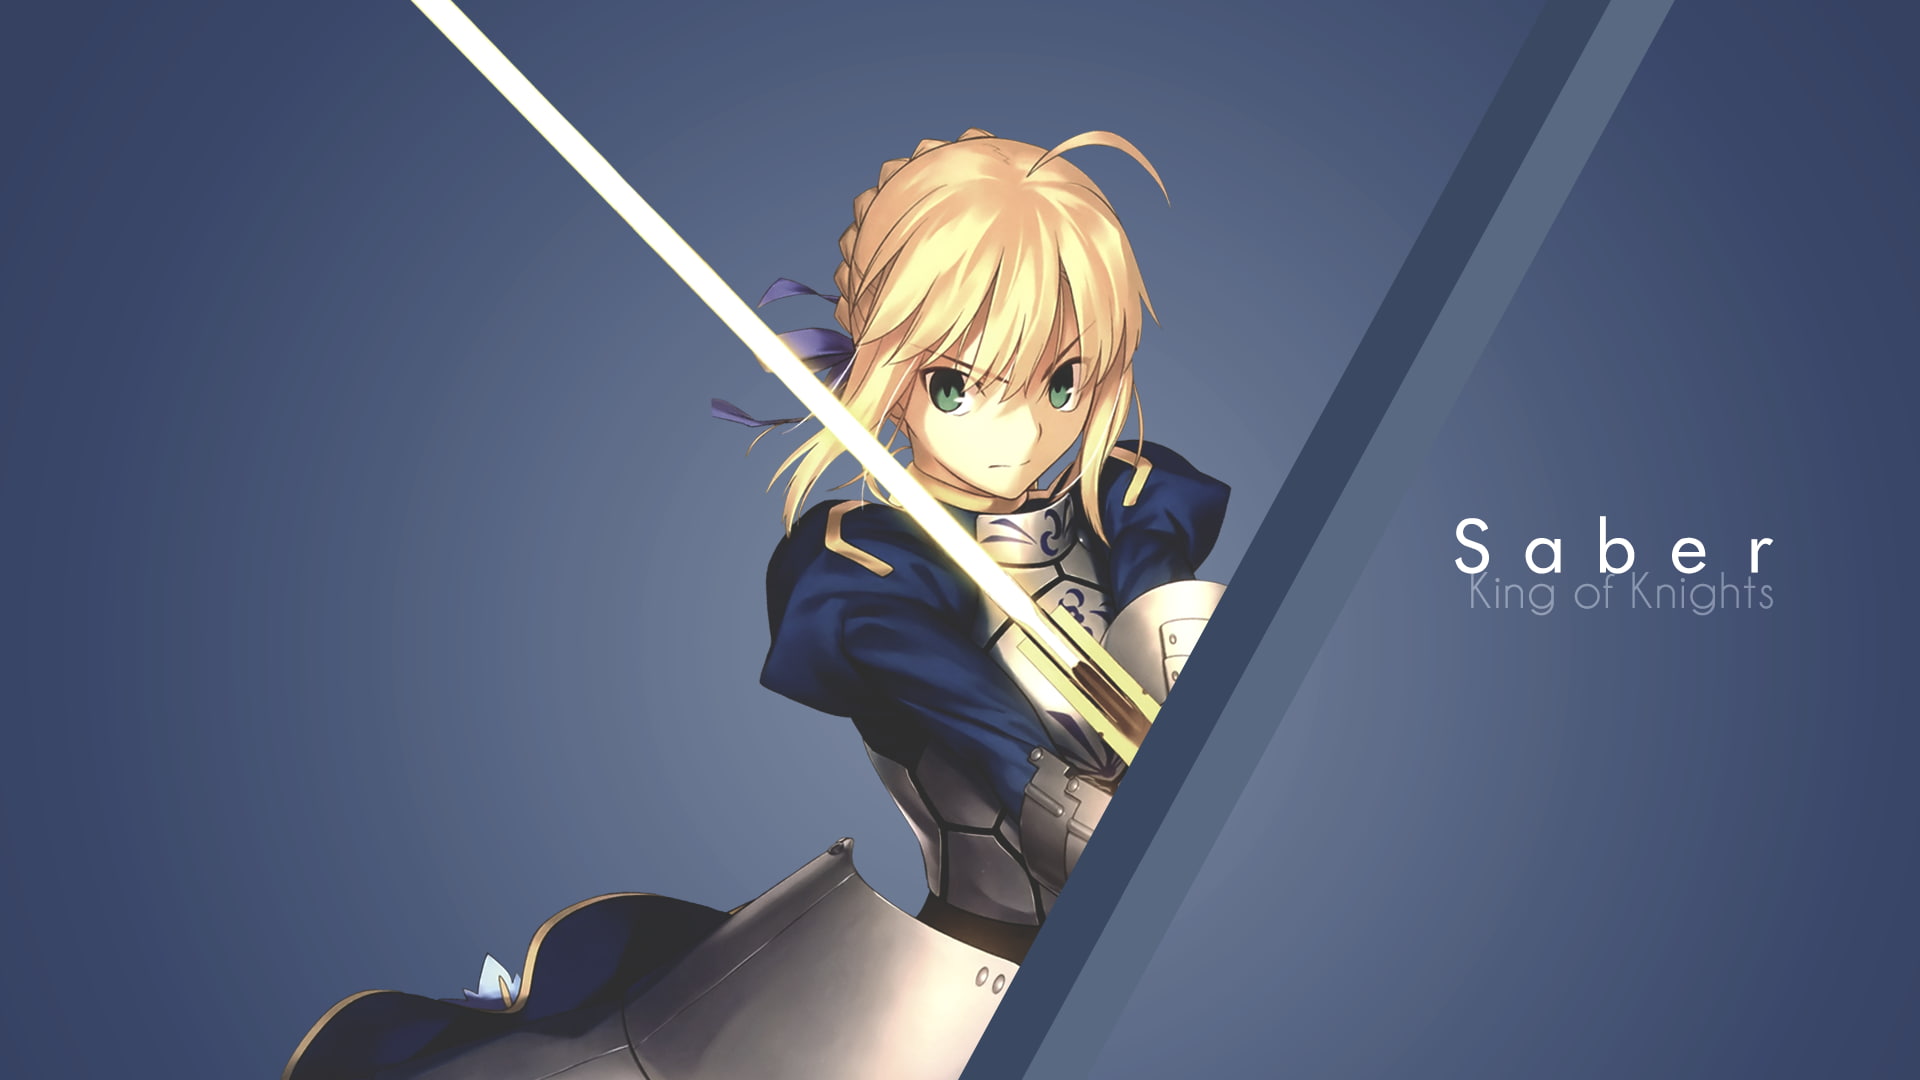 Fate Series, Saber, Fate/Stay Night, anime girls, one person